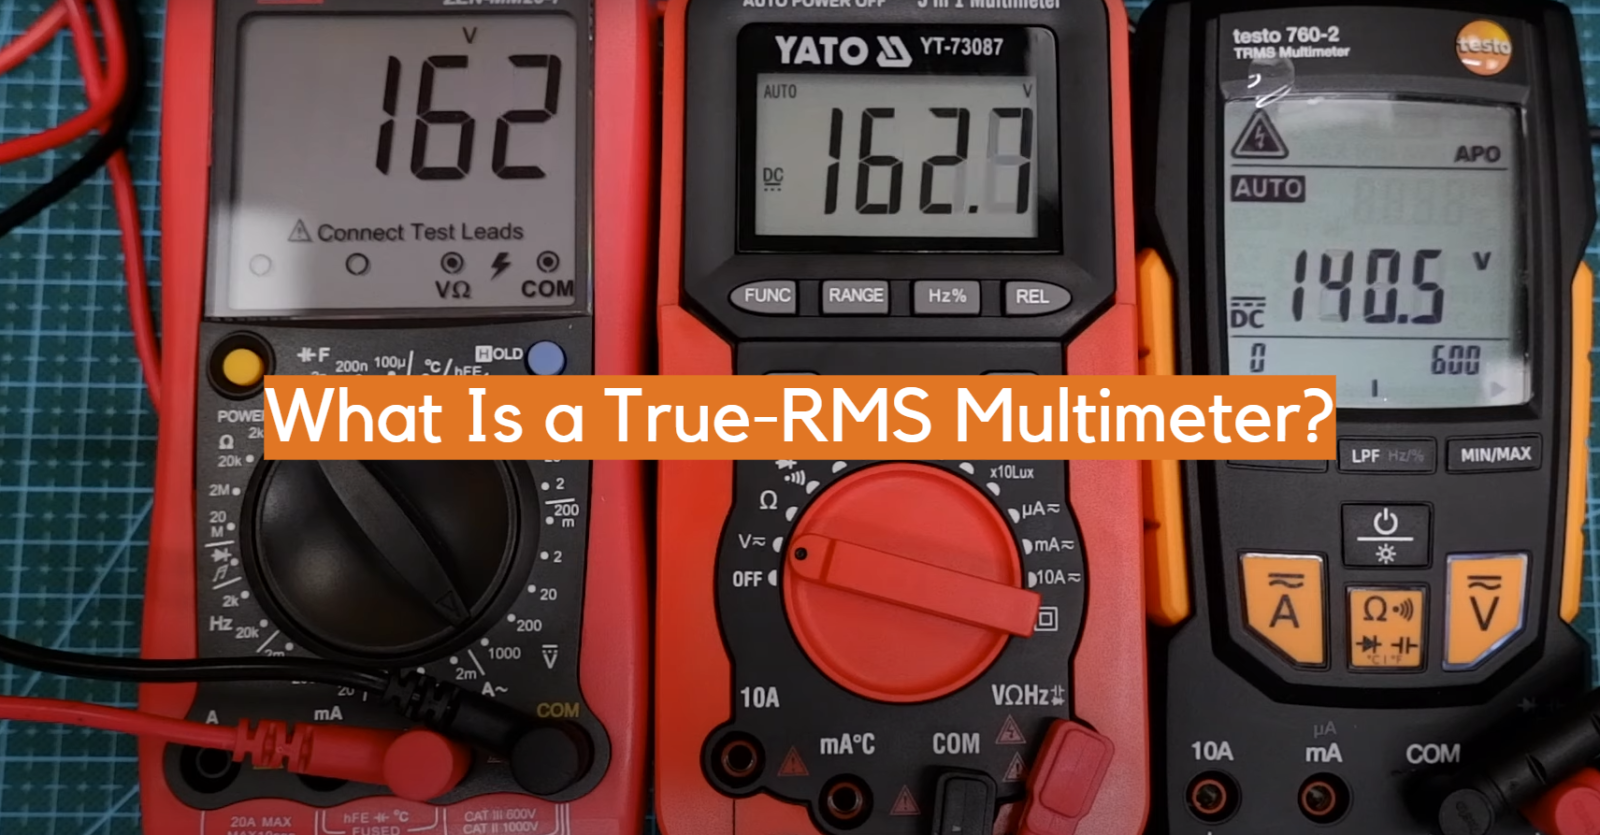 What Is a True-RMS Multimeter?